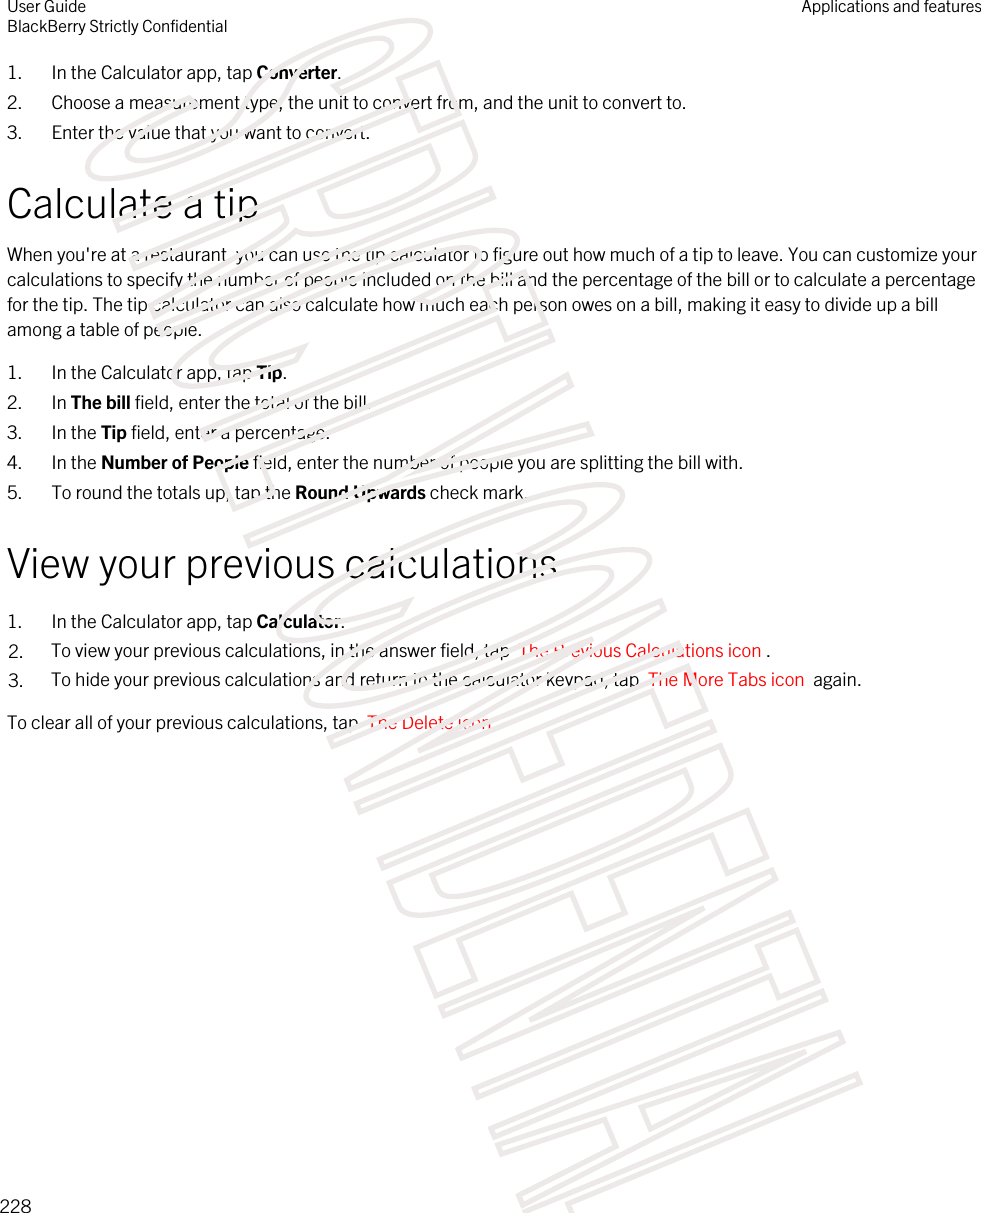 1. In the Calculator app, tap Converter.2. Choose a measurement type, the unit to convert from, and the unit to convert to.3. Enter the value that you want to convert.Calculate a tipWhen you&apos;re at a restaurant, you can use the tip calculator to figure out how much of a tip to leave. You can customize your calculations to specify the number of people included on the bill and the percentage of the bill or to calculate a percentage for the tip. The tip calculator can also calculate how much each person owes on a bill, making it easy to divide up a bill among a table of people.1. In the Calculator app, tap Tip.2. In The bill field, enter the total of the bill.3. In the Tip field, enter a percentage.4. In the Number of People field, enter the number of people you are splitting the bill with.5. To round the totals up, tap the Round Upwards check mark.View your previous calculations1. In the Calculator app, tap Calculator.2. To view your previous calculations, in the answer field, tap  The Previous Calculations icon .3. To hide your previous calculations and return to the calculator keypad, tap  The More Tabs icon  again.To clear all of your previous calculations, tap  The Delete icon .User GuideBlackBerry Strictly ConfidentialApplications and features228STRICTLY CONFIDENTIAL